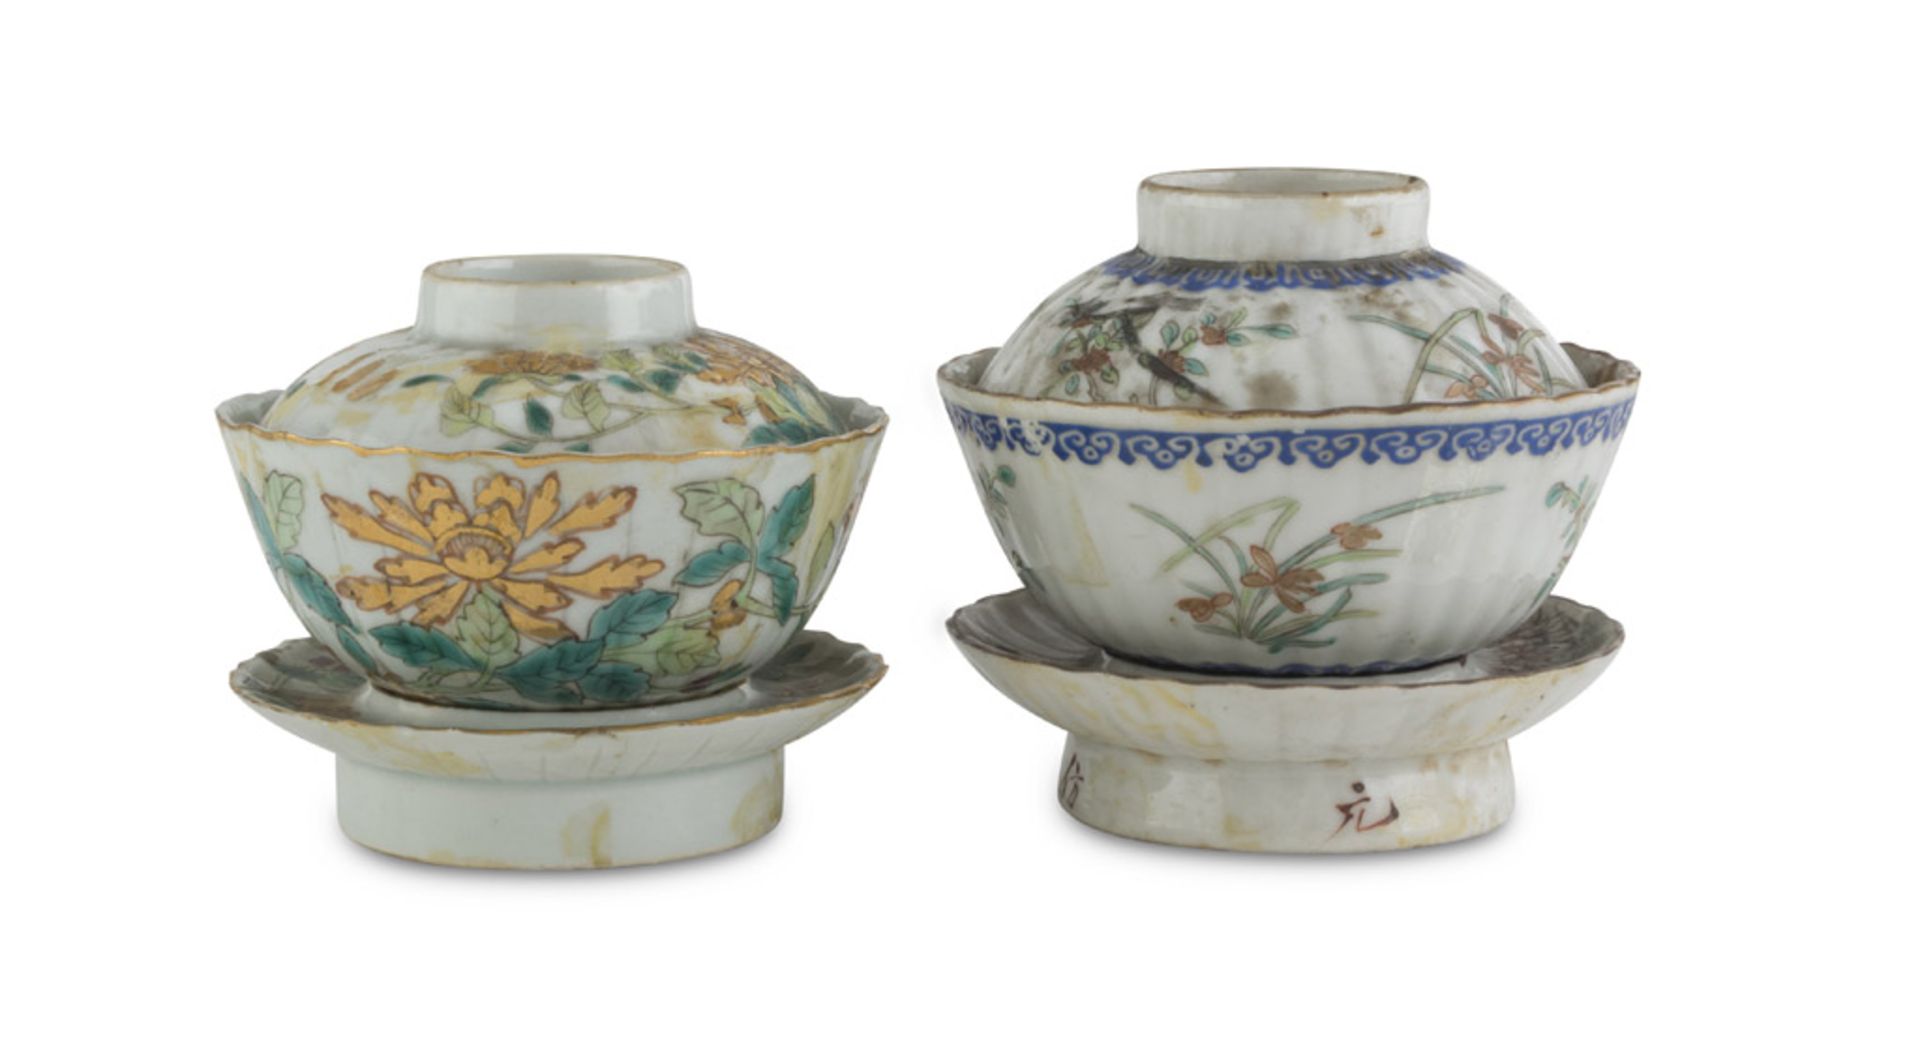 TWO PORCELAIN BOWLS WITH LIDS AND SAUCERS IN POLYCHROME ENAMEL AND GOLD, CHINA EARLY 20TH CENTURY